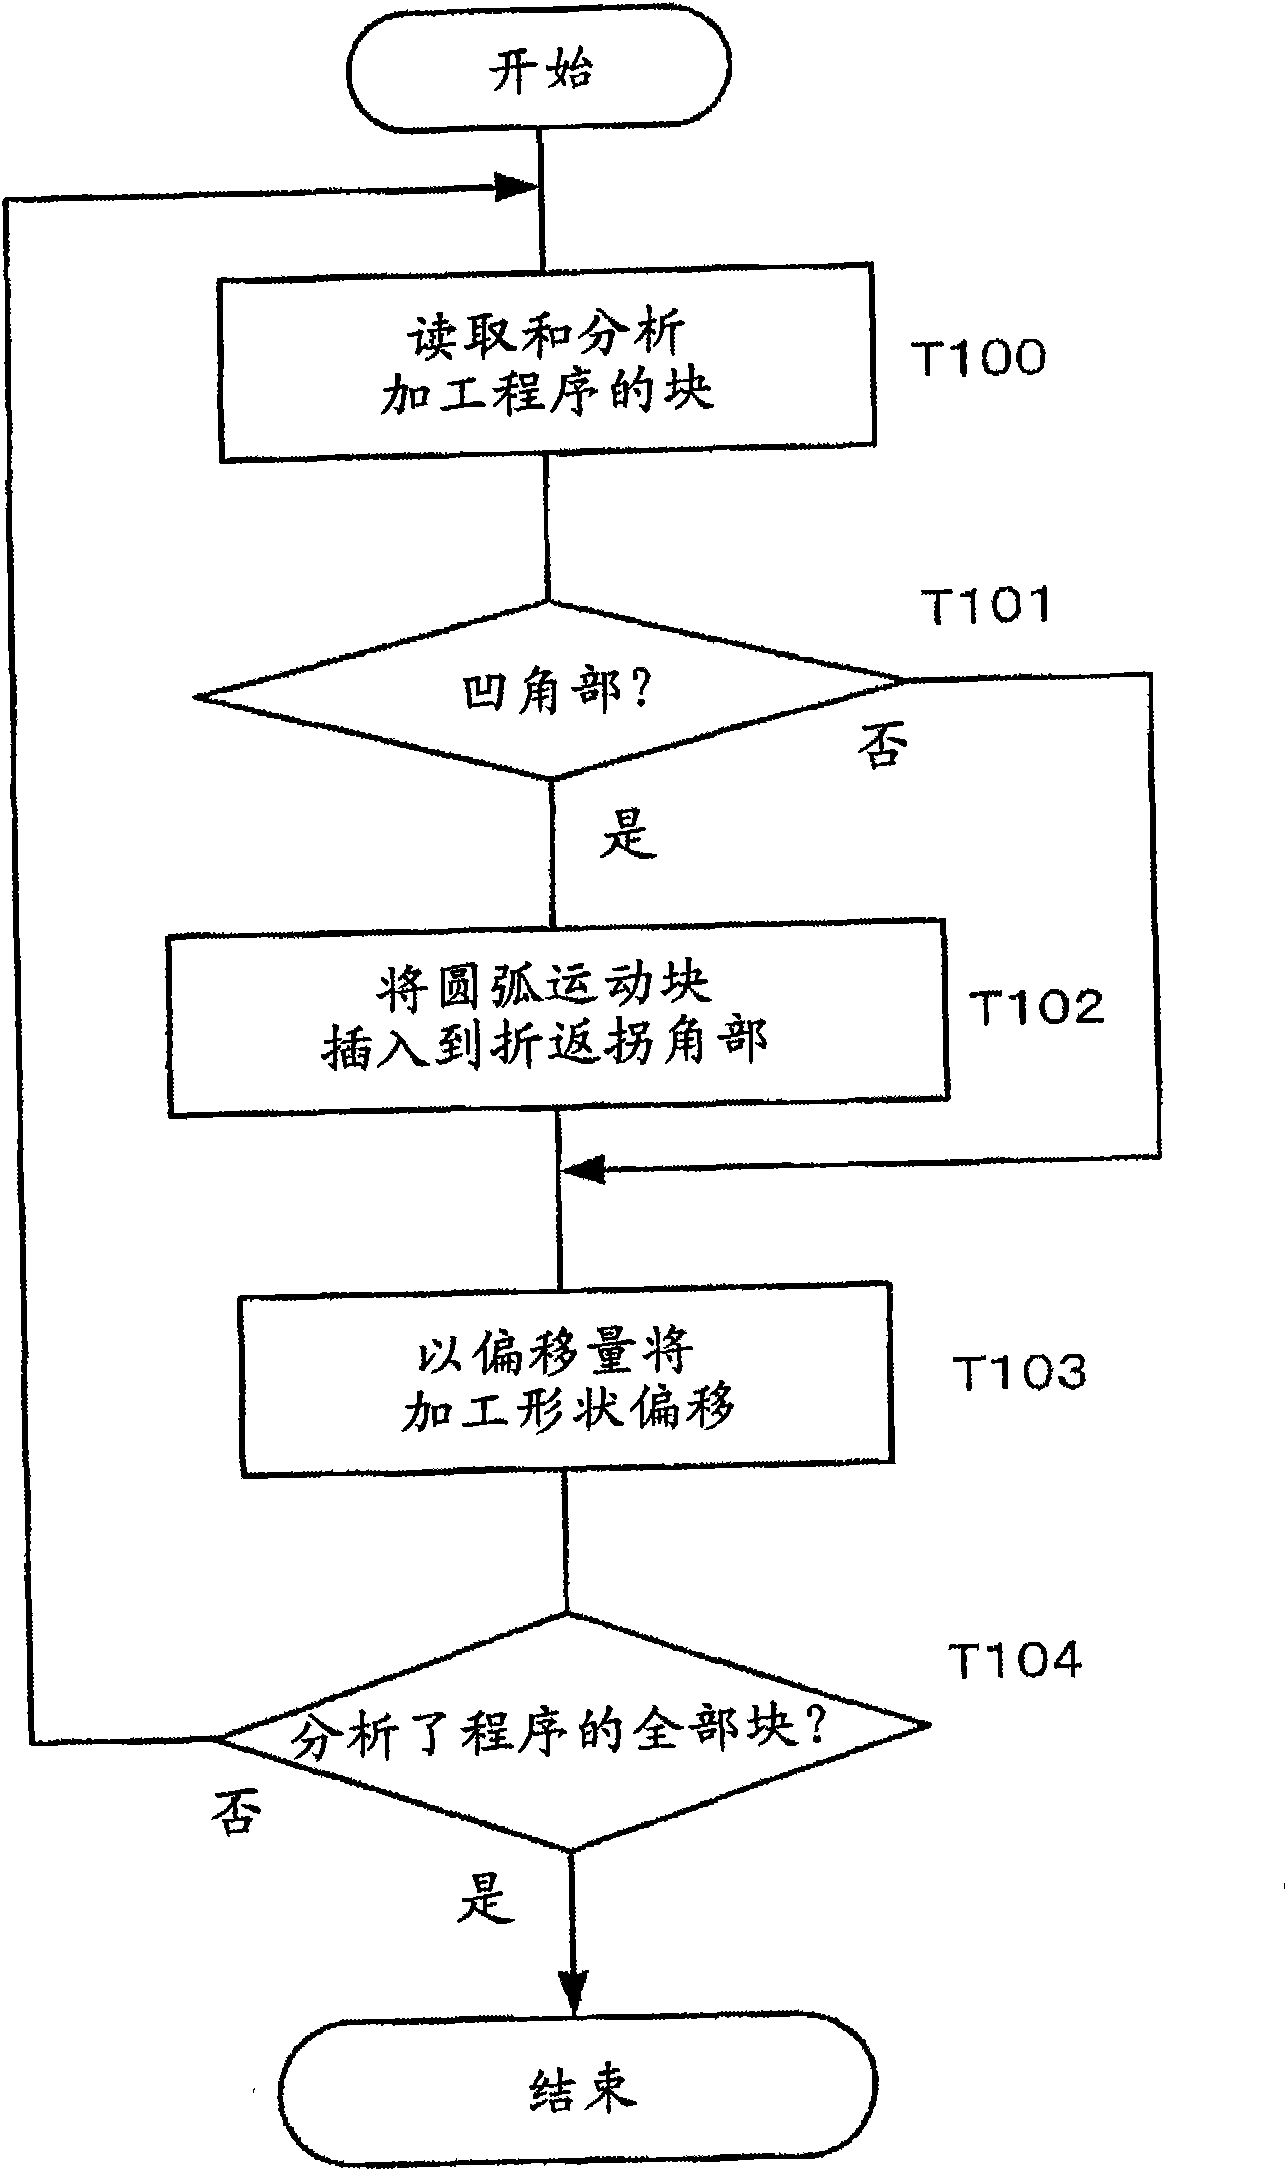 Controller of wire-cut electric discharge machine and machining path generation device for wire-cut electric discharge machine